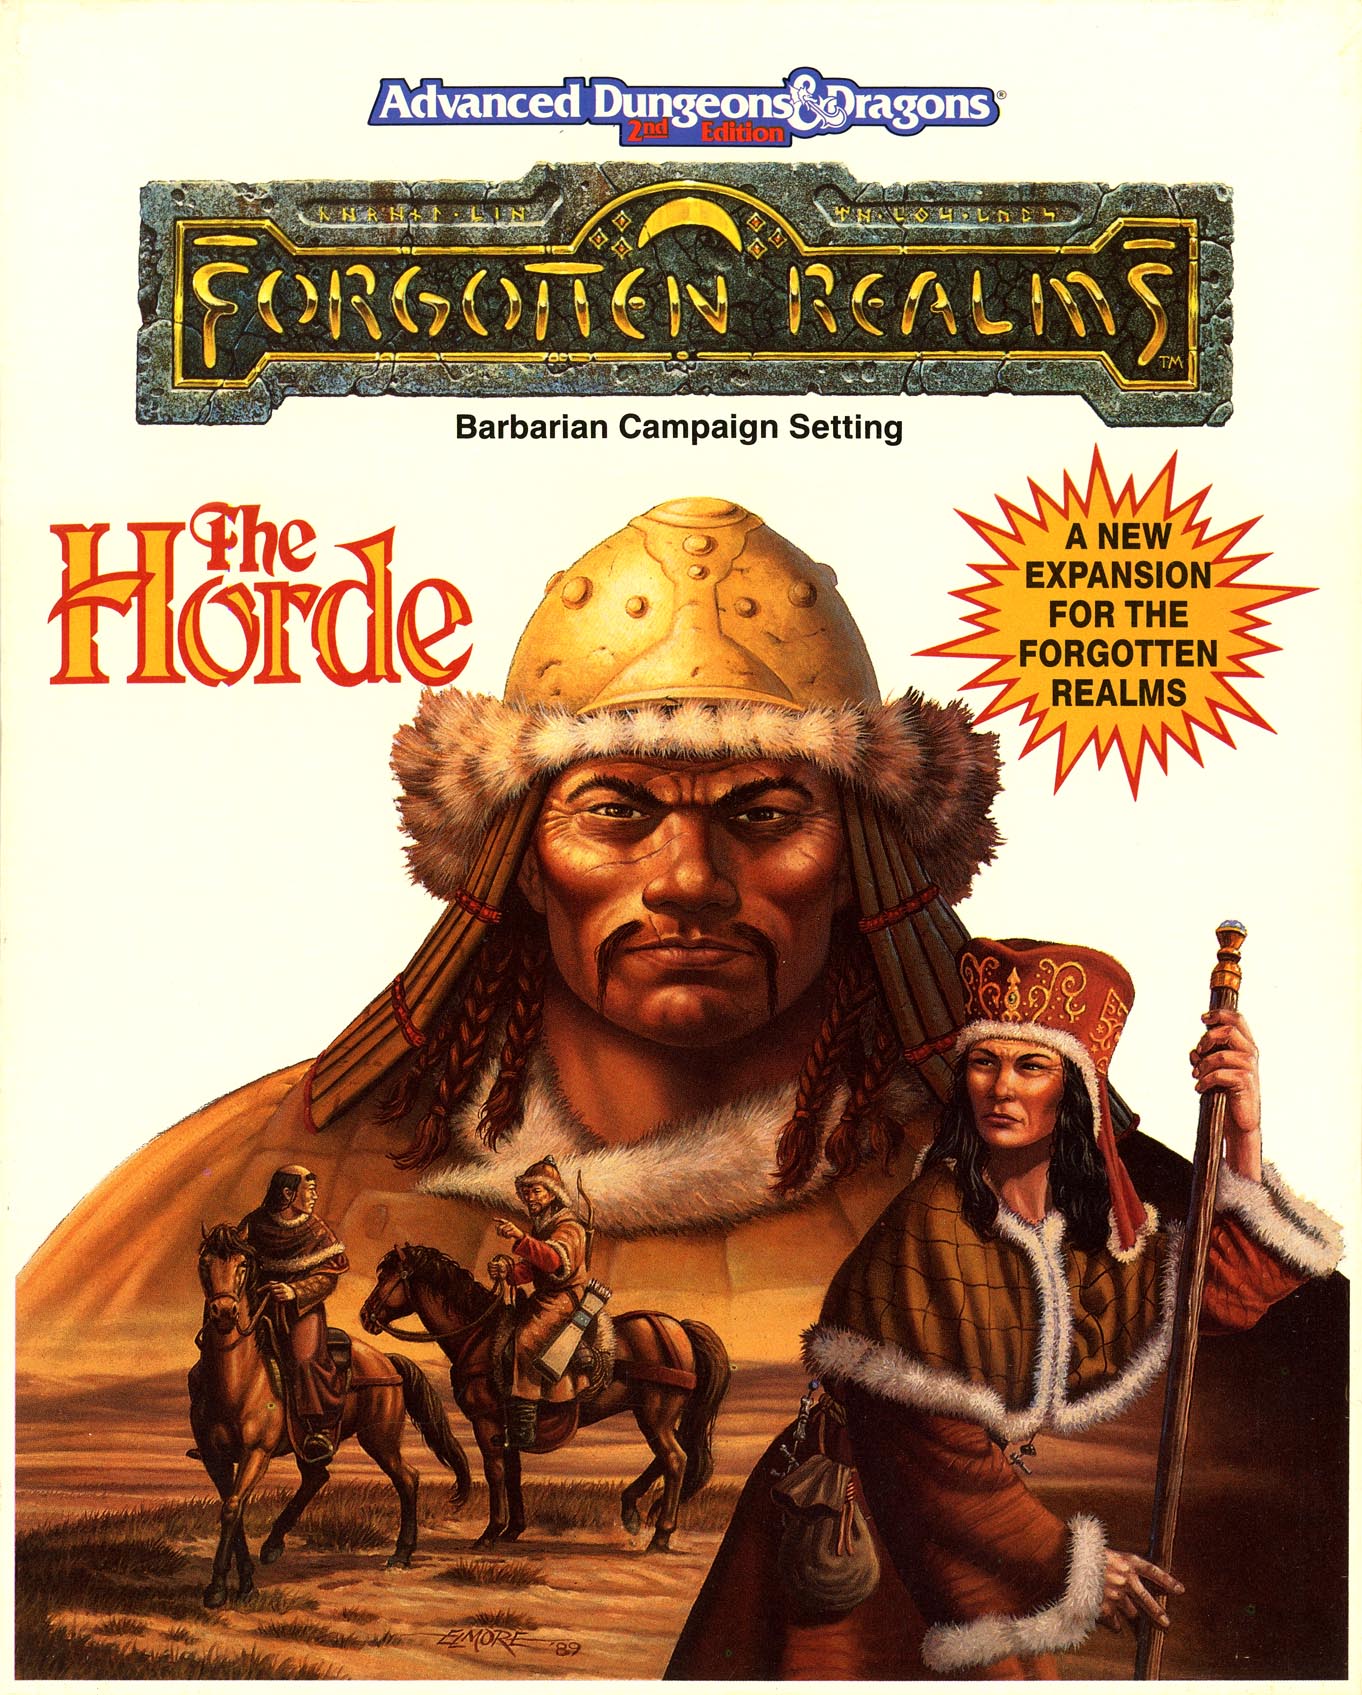 The Horde (boxed set)Cover art